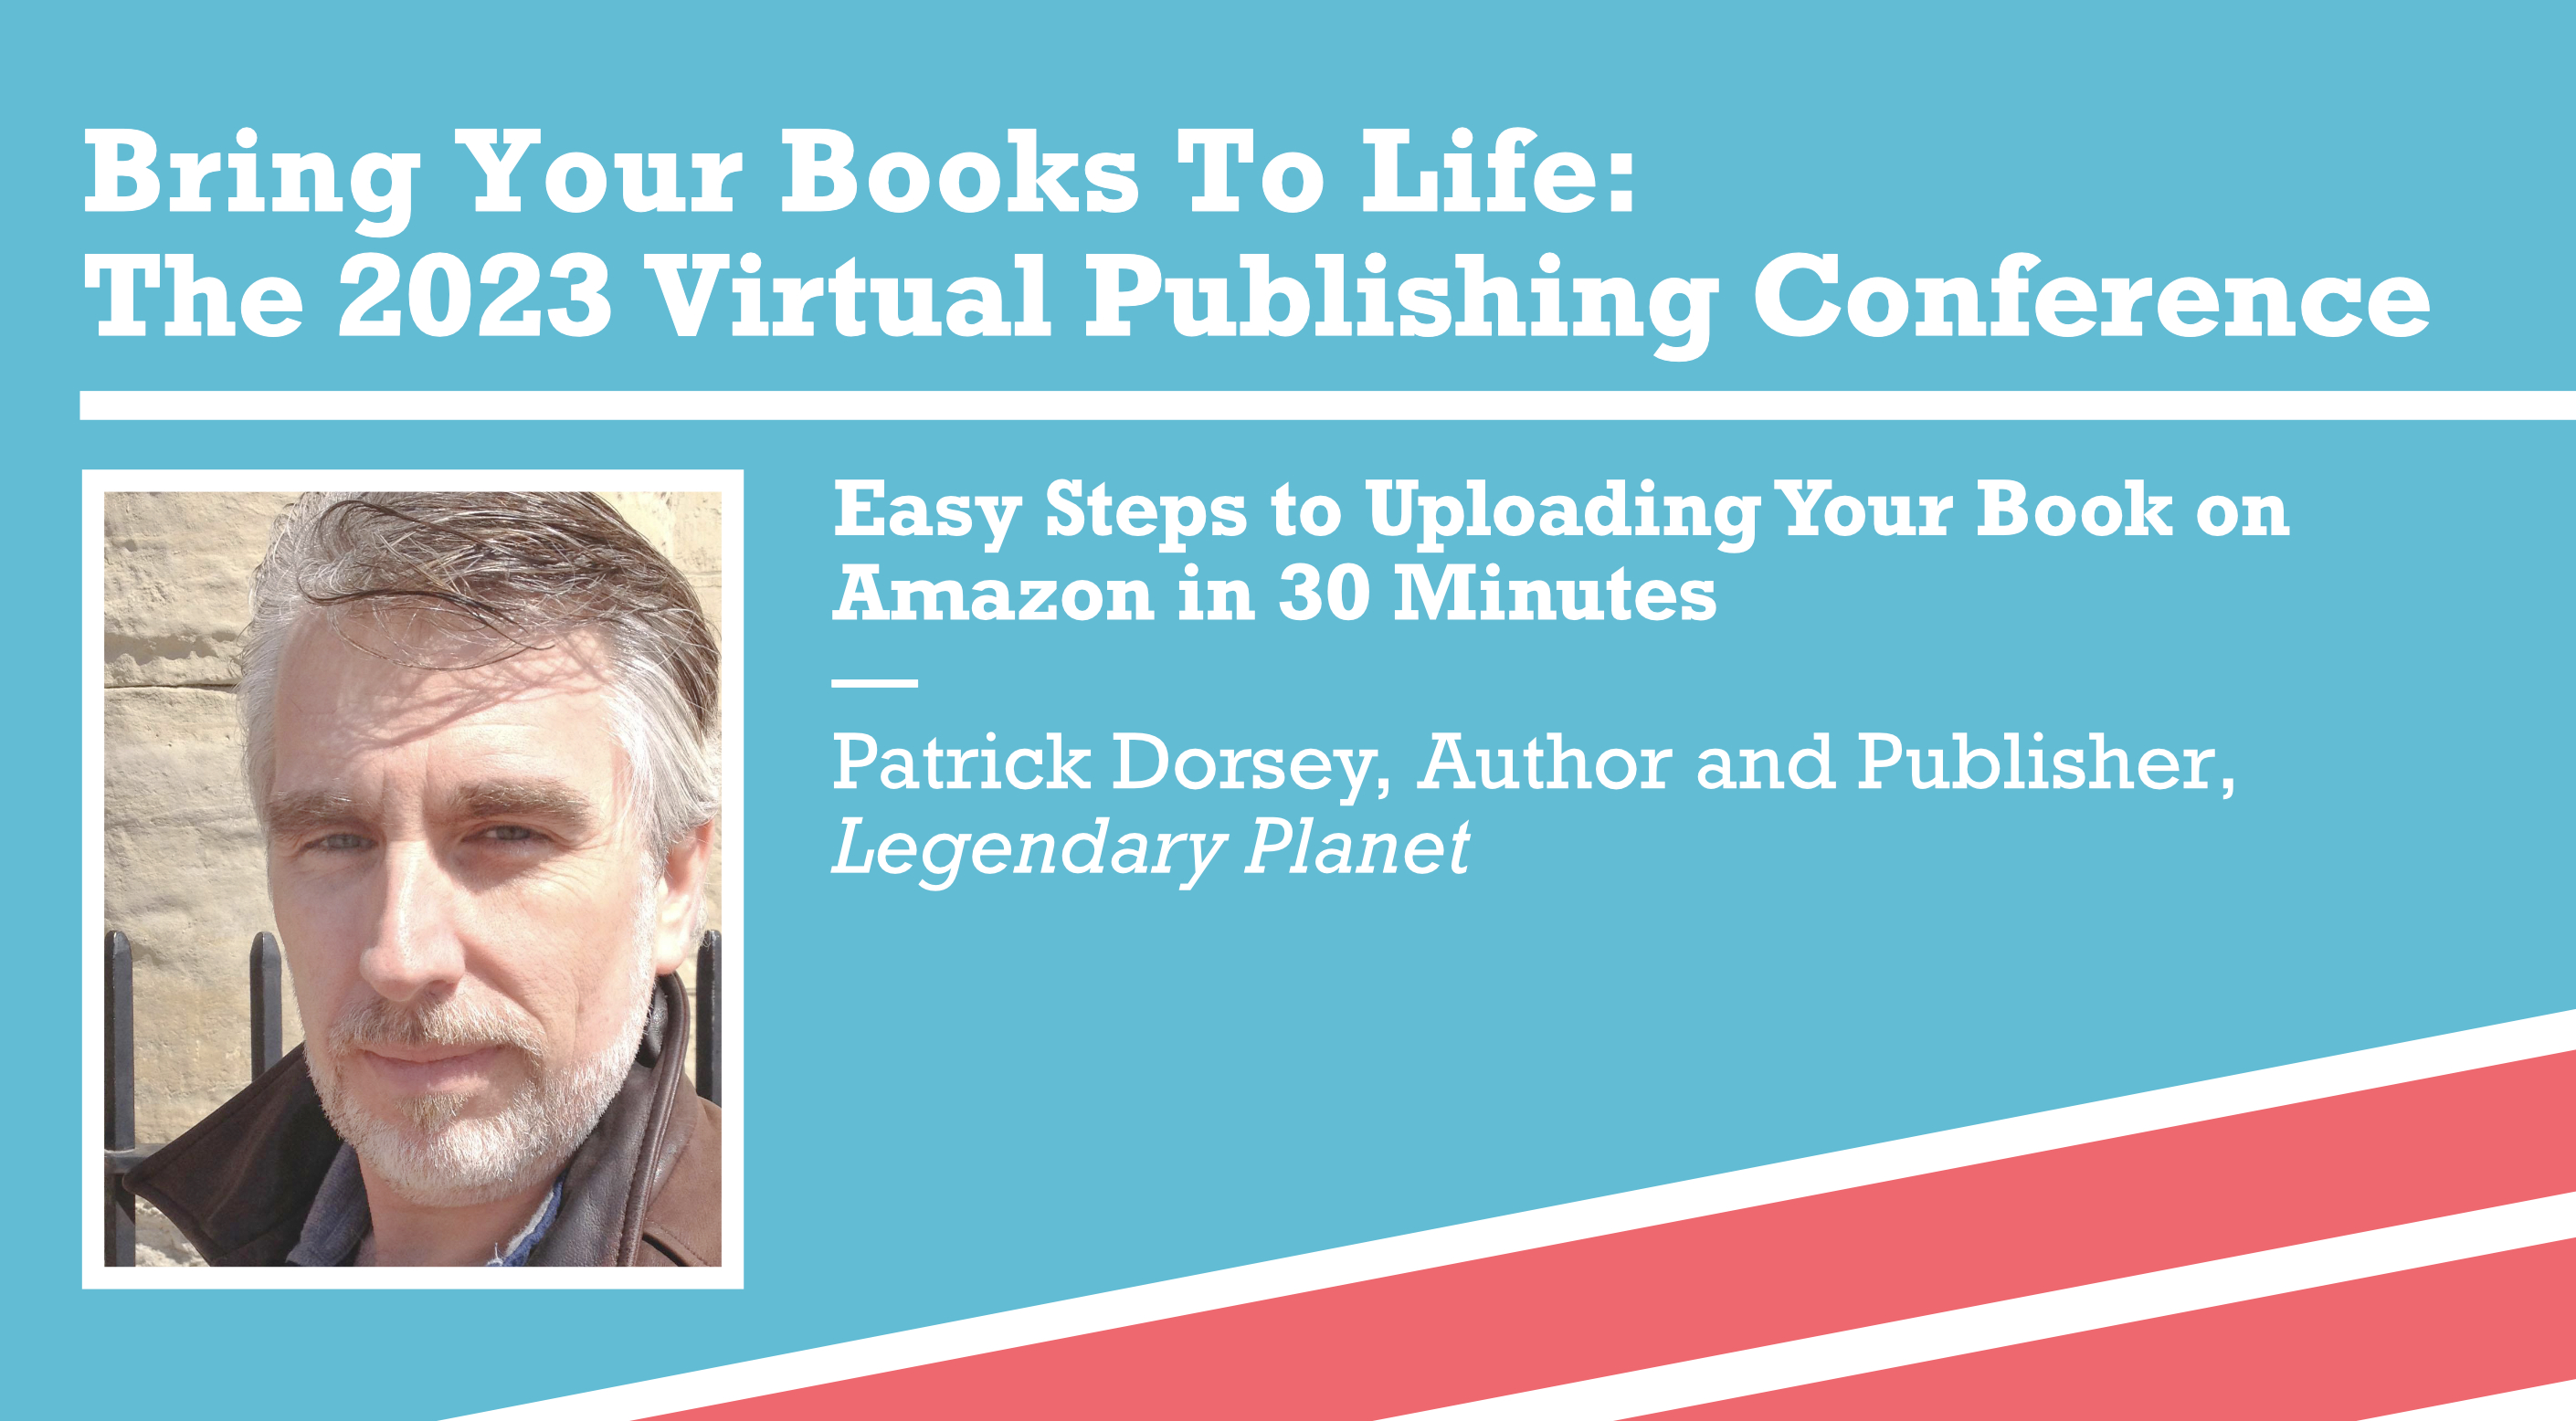 Easy Steps to Uploading Your Book on Amazon in 30 Minutes — Patrick Dorsey, Author and Publisher, Legendary Planet